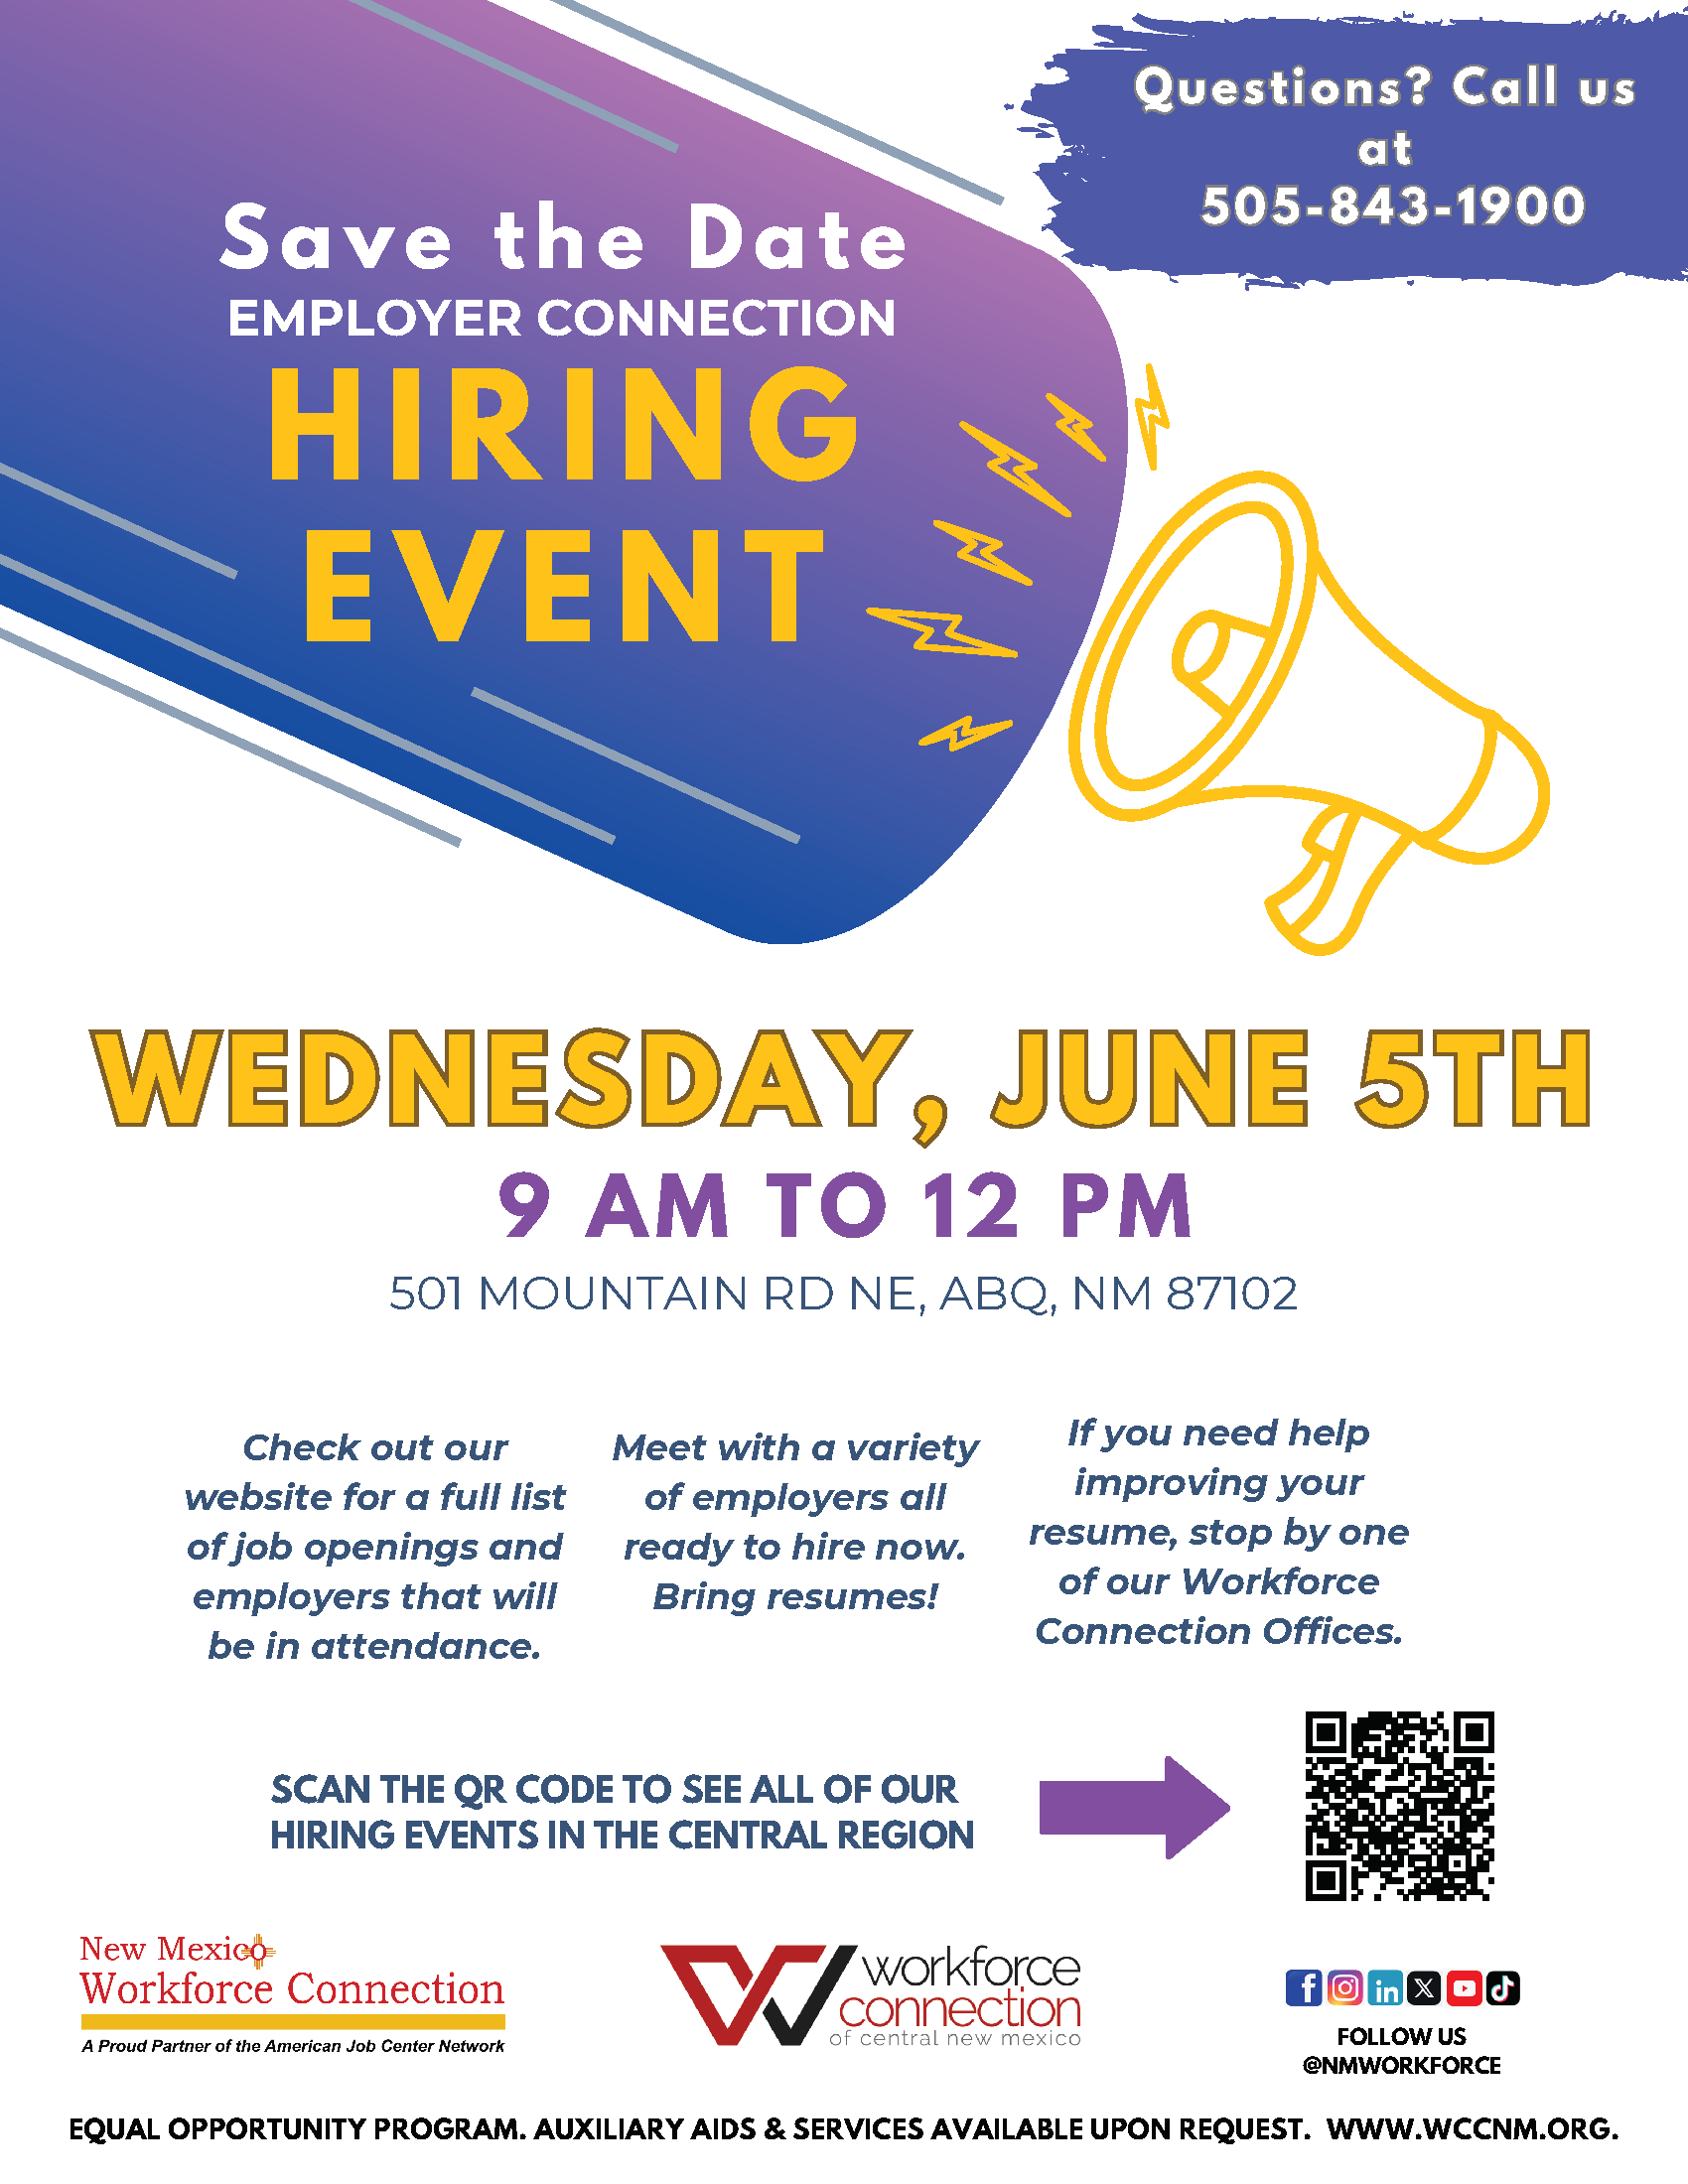 Save the Date Employer Connection Hiring Event Flyer